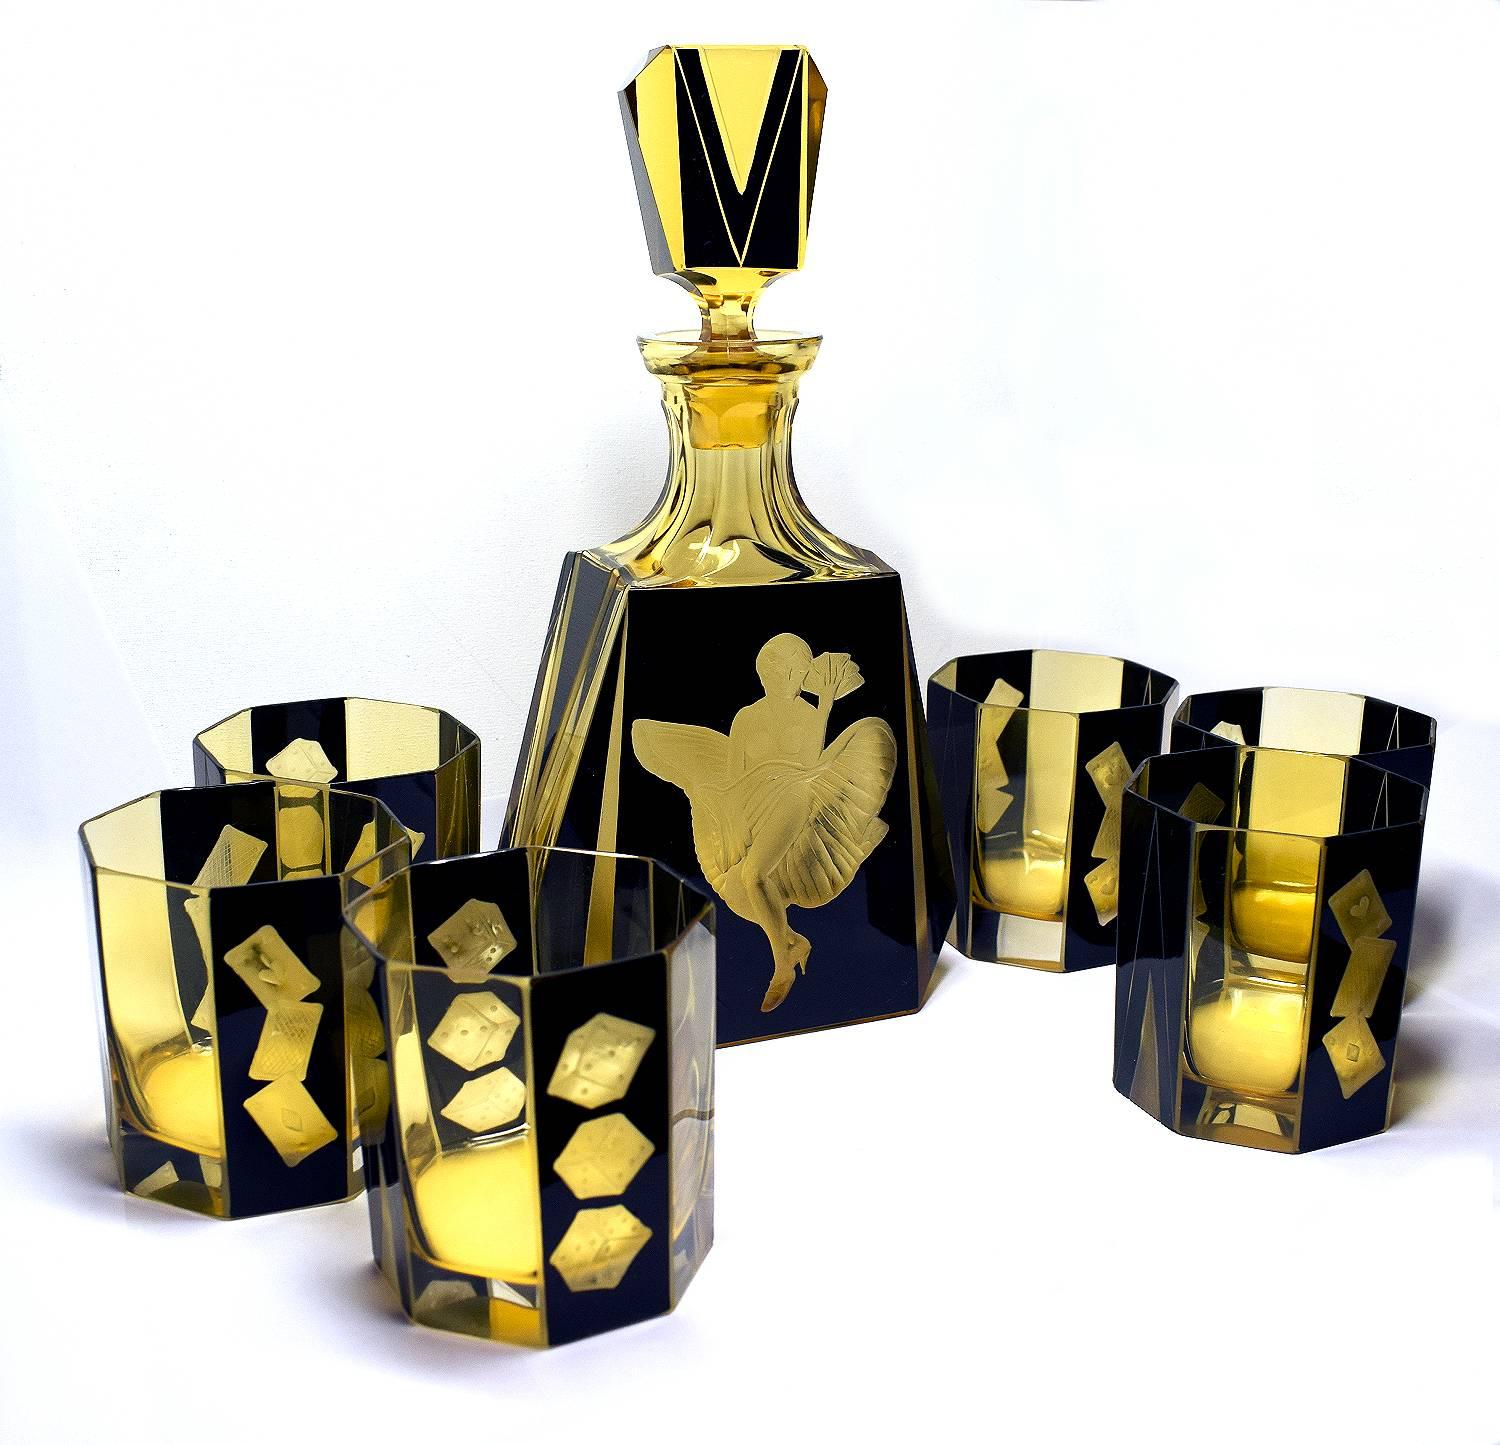 Fabulous 1930s Art Deco decanter set by Karl Palda. Comprises a heavy cut-glass decanter, stopper and six tumbler glasses, all with enamel geometric decoration and etched games design. This rare set oozes quality. All in perfect condition. The